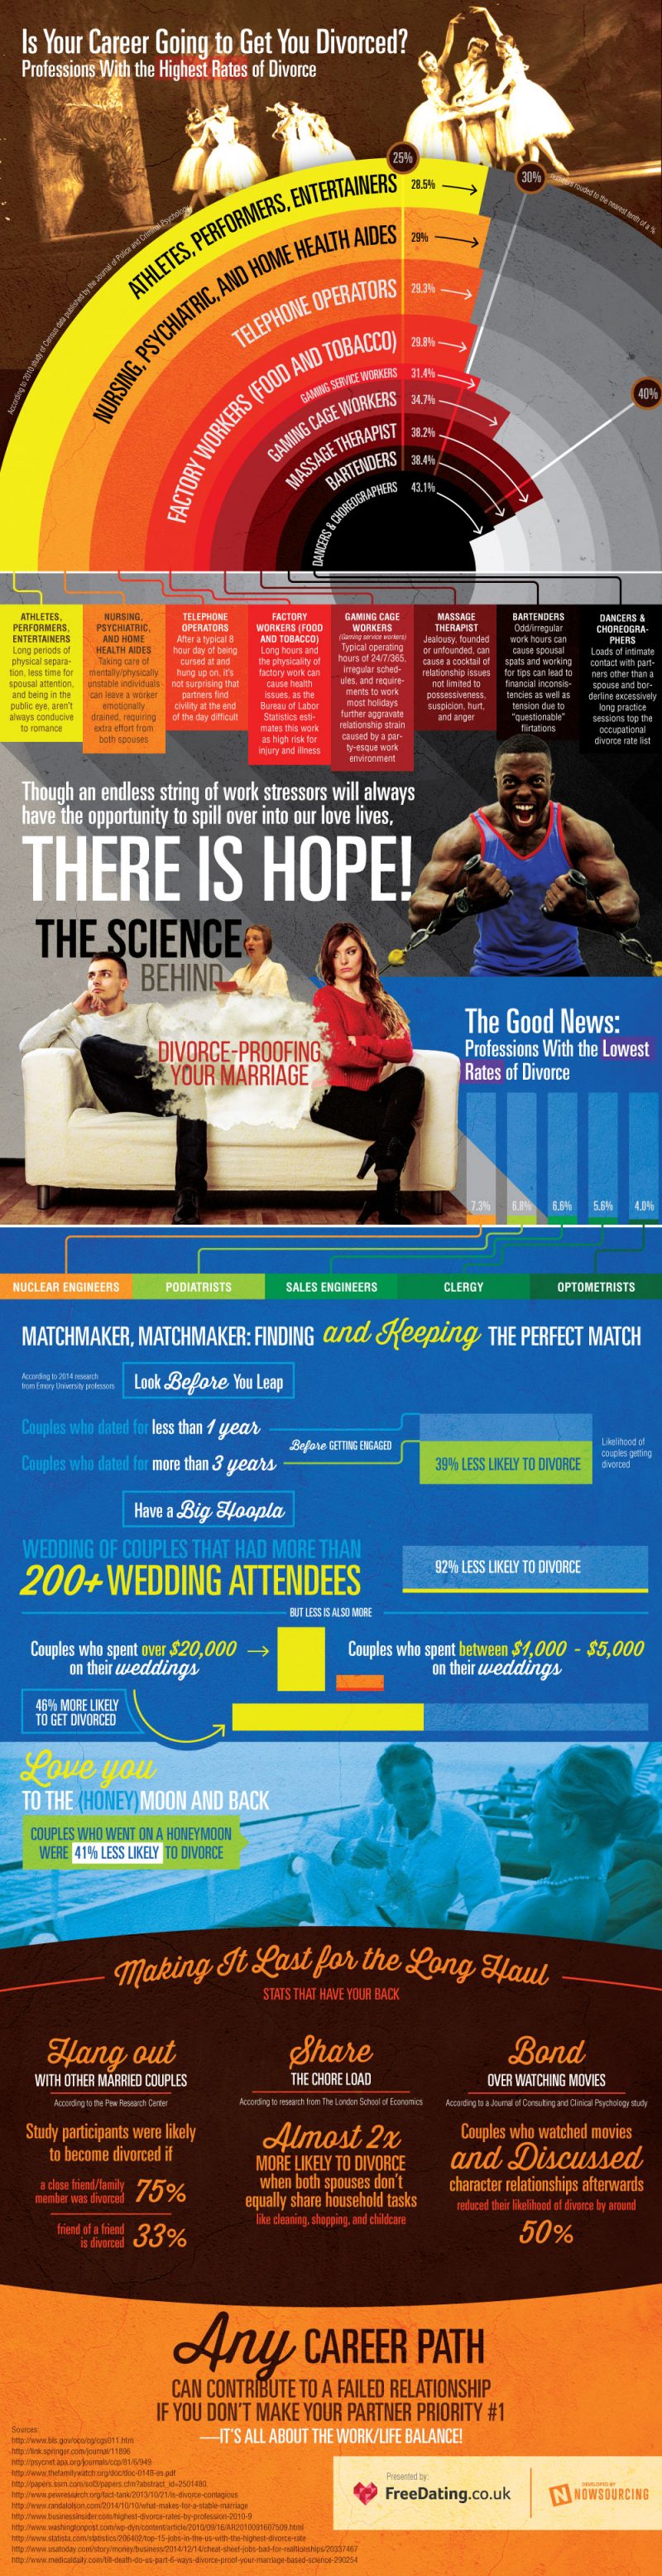 Is Your Career Going To Get You Divorced? [Infographic